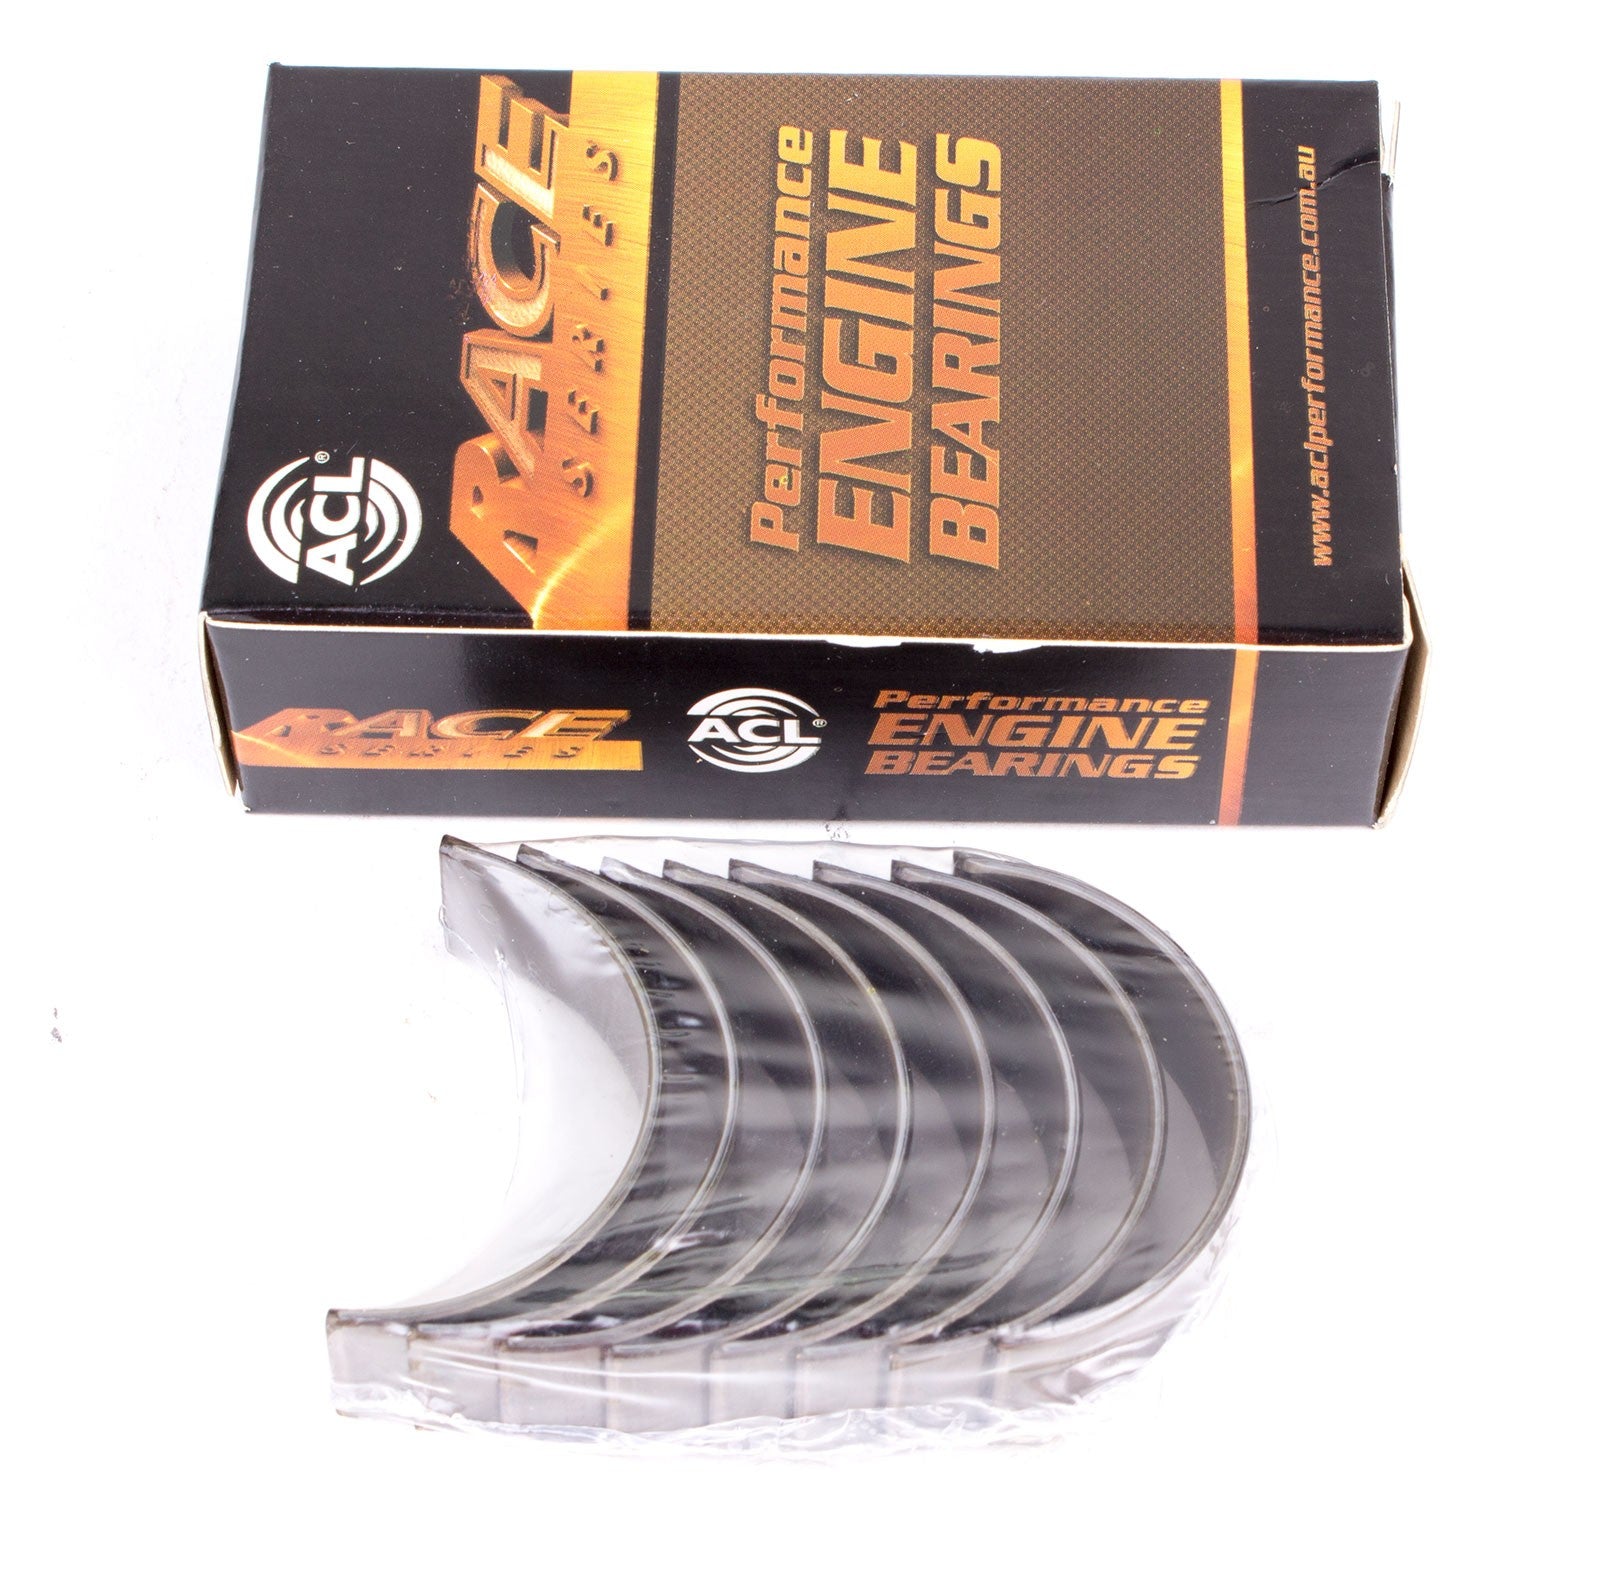 ACL 4M1149H-.025 Main bearing set (ACL Race Series) Photo-0 